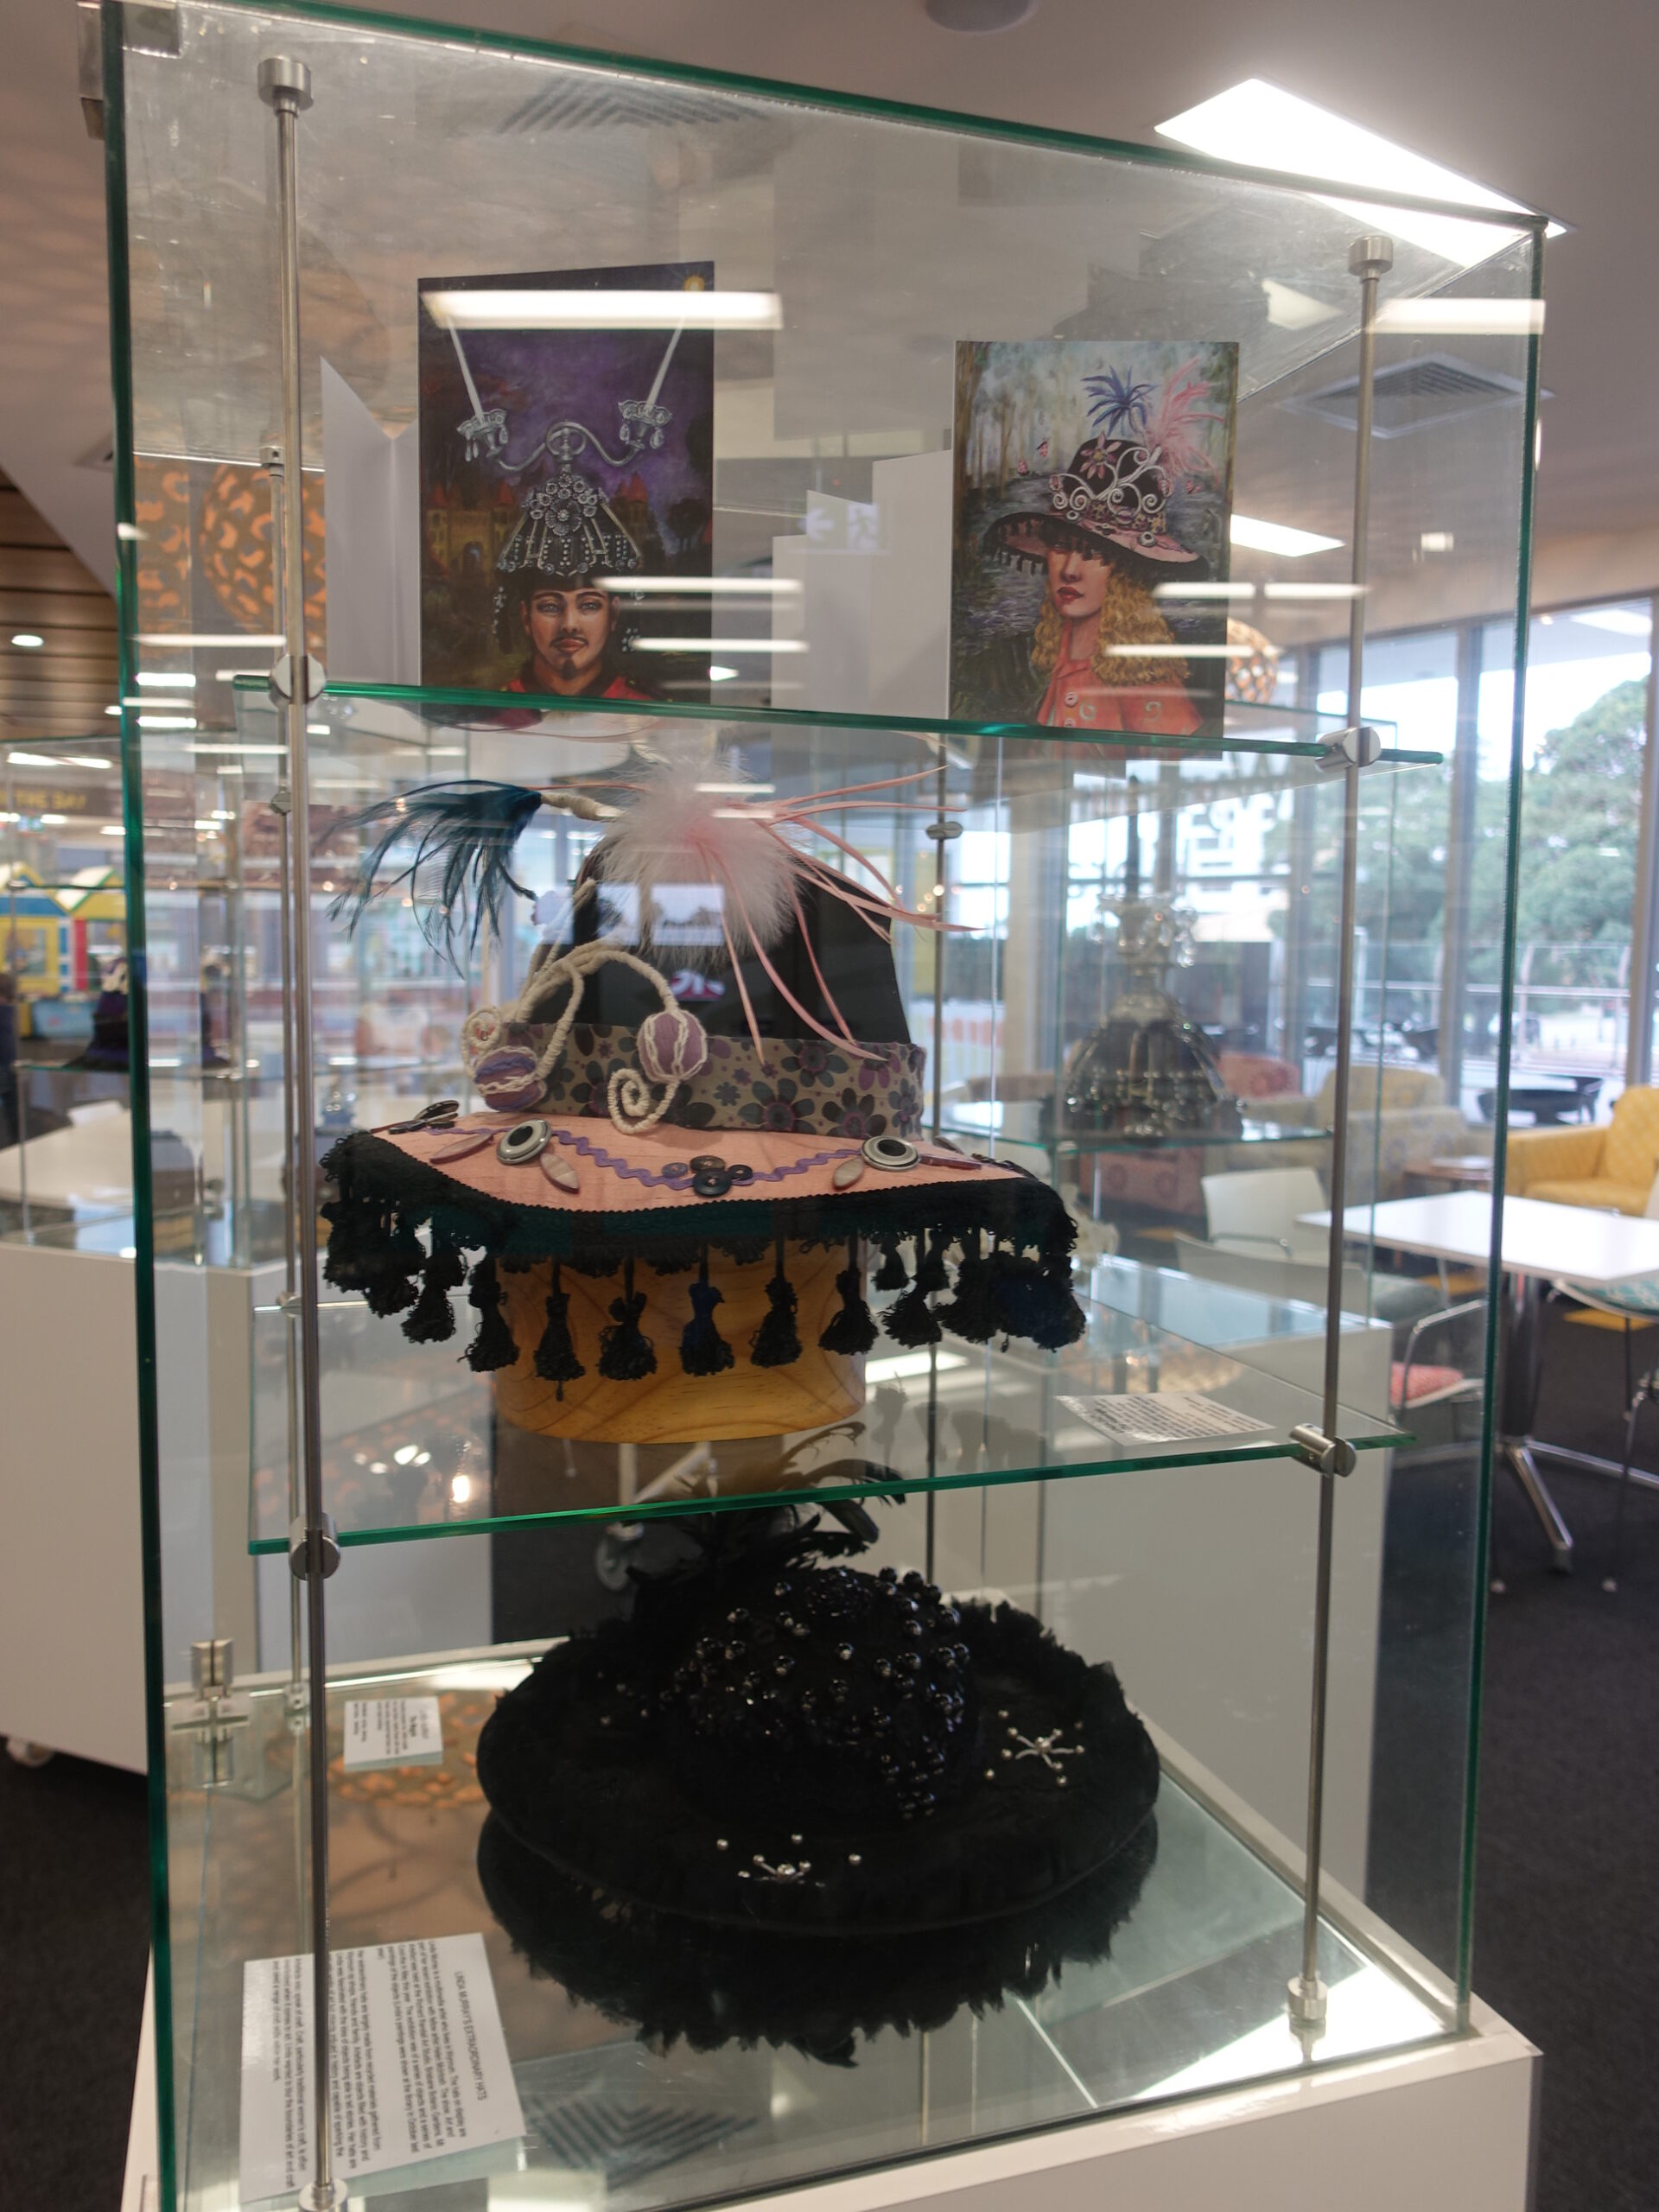 Two extraordinary hats on display at the Wynnum library